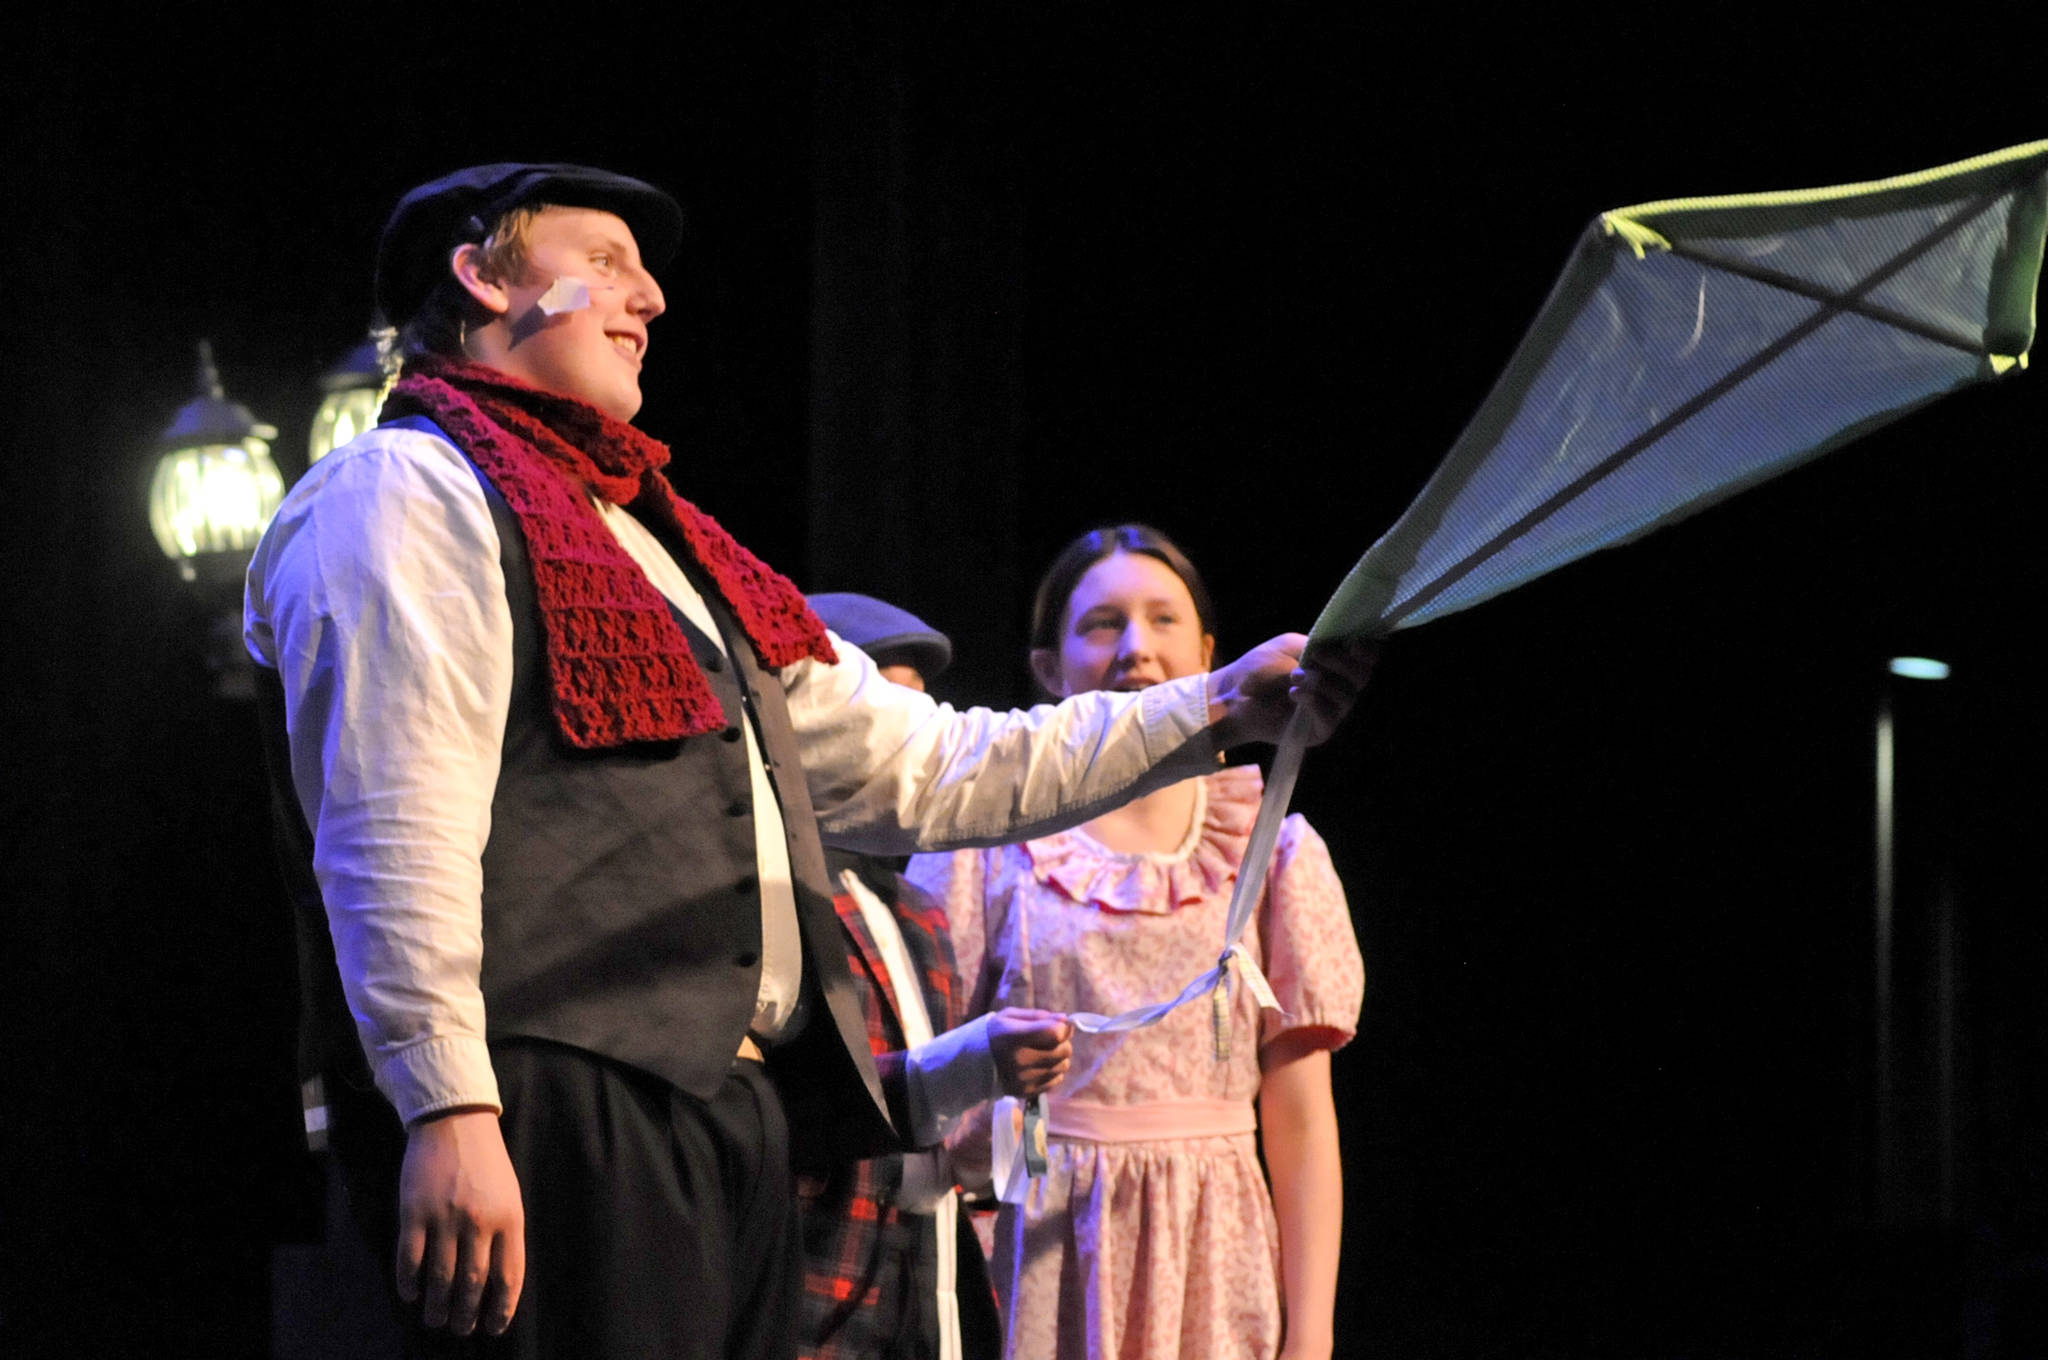 TOP: Bert (played by Ethan Hack) tells Jane (Leora McCaughey) and Michael Banks (Brynne Tedford) about flying kites during a dress rehearsal for Nikiski Middle-High School’s production of “Mary Poppins” on Monday in Nikiski.